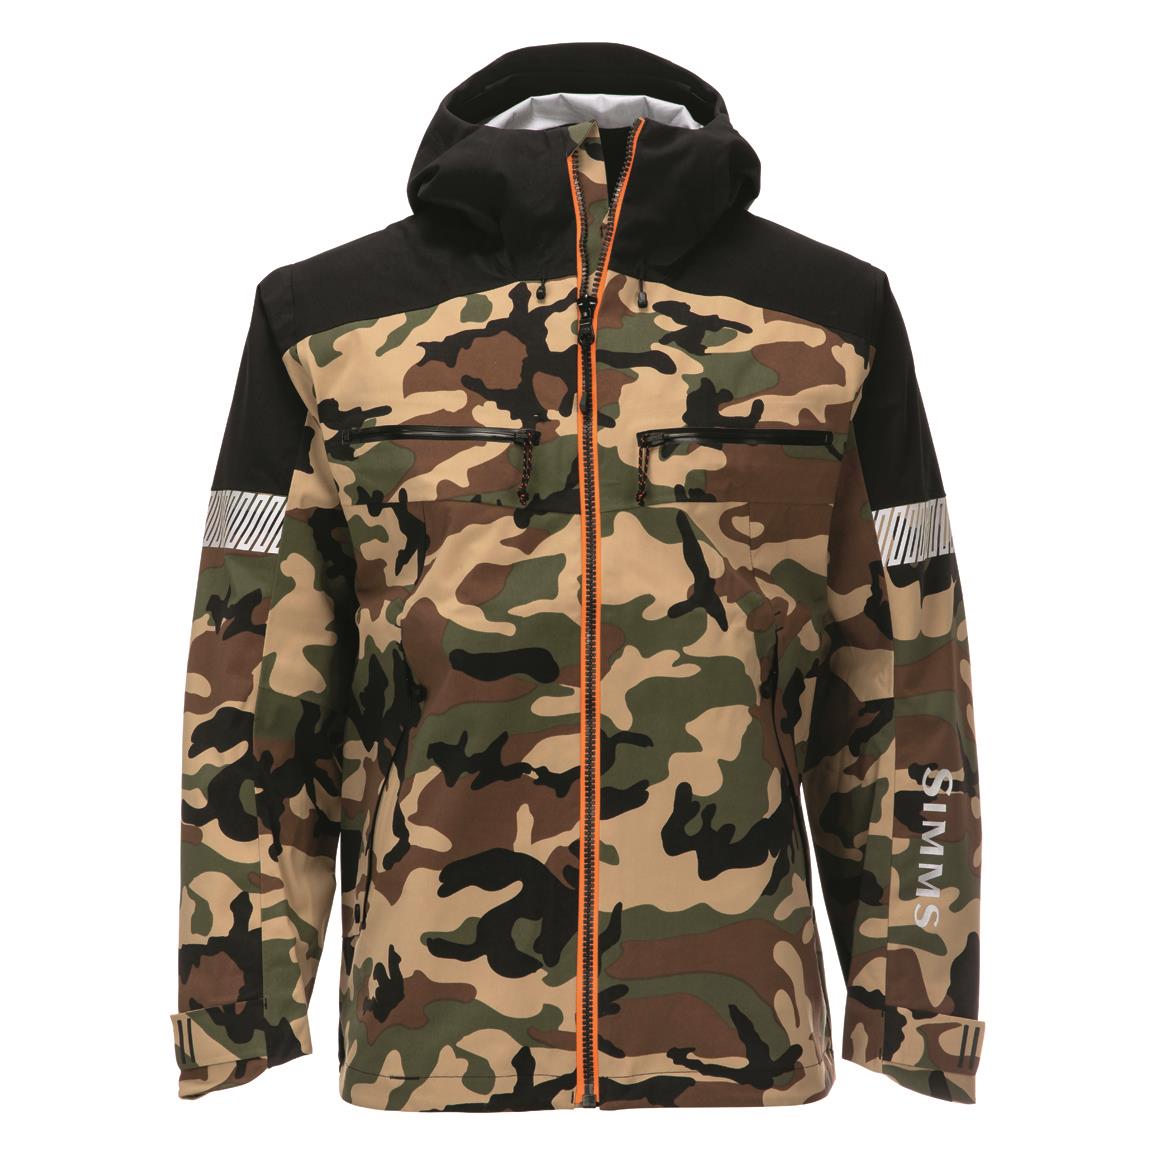 Exclusive 3-layer waterproof/breathable CFLEX3 construction, Cx Woodland Camo